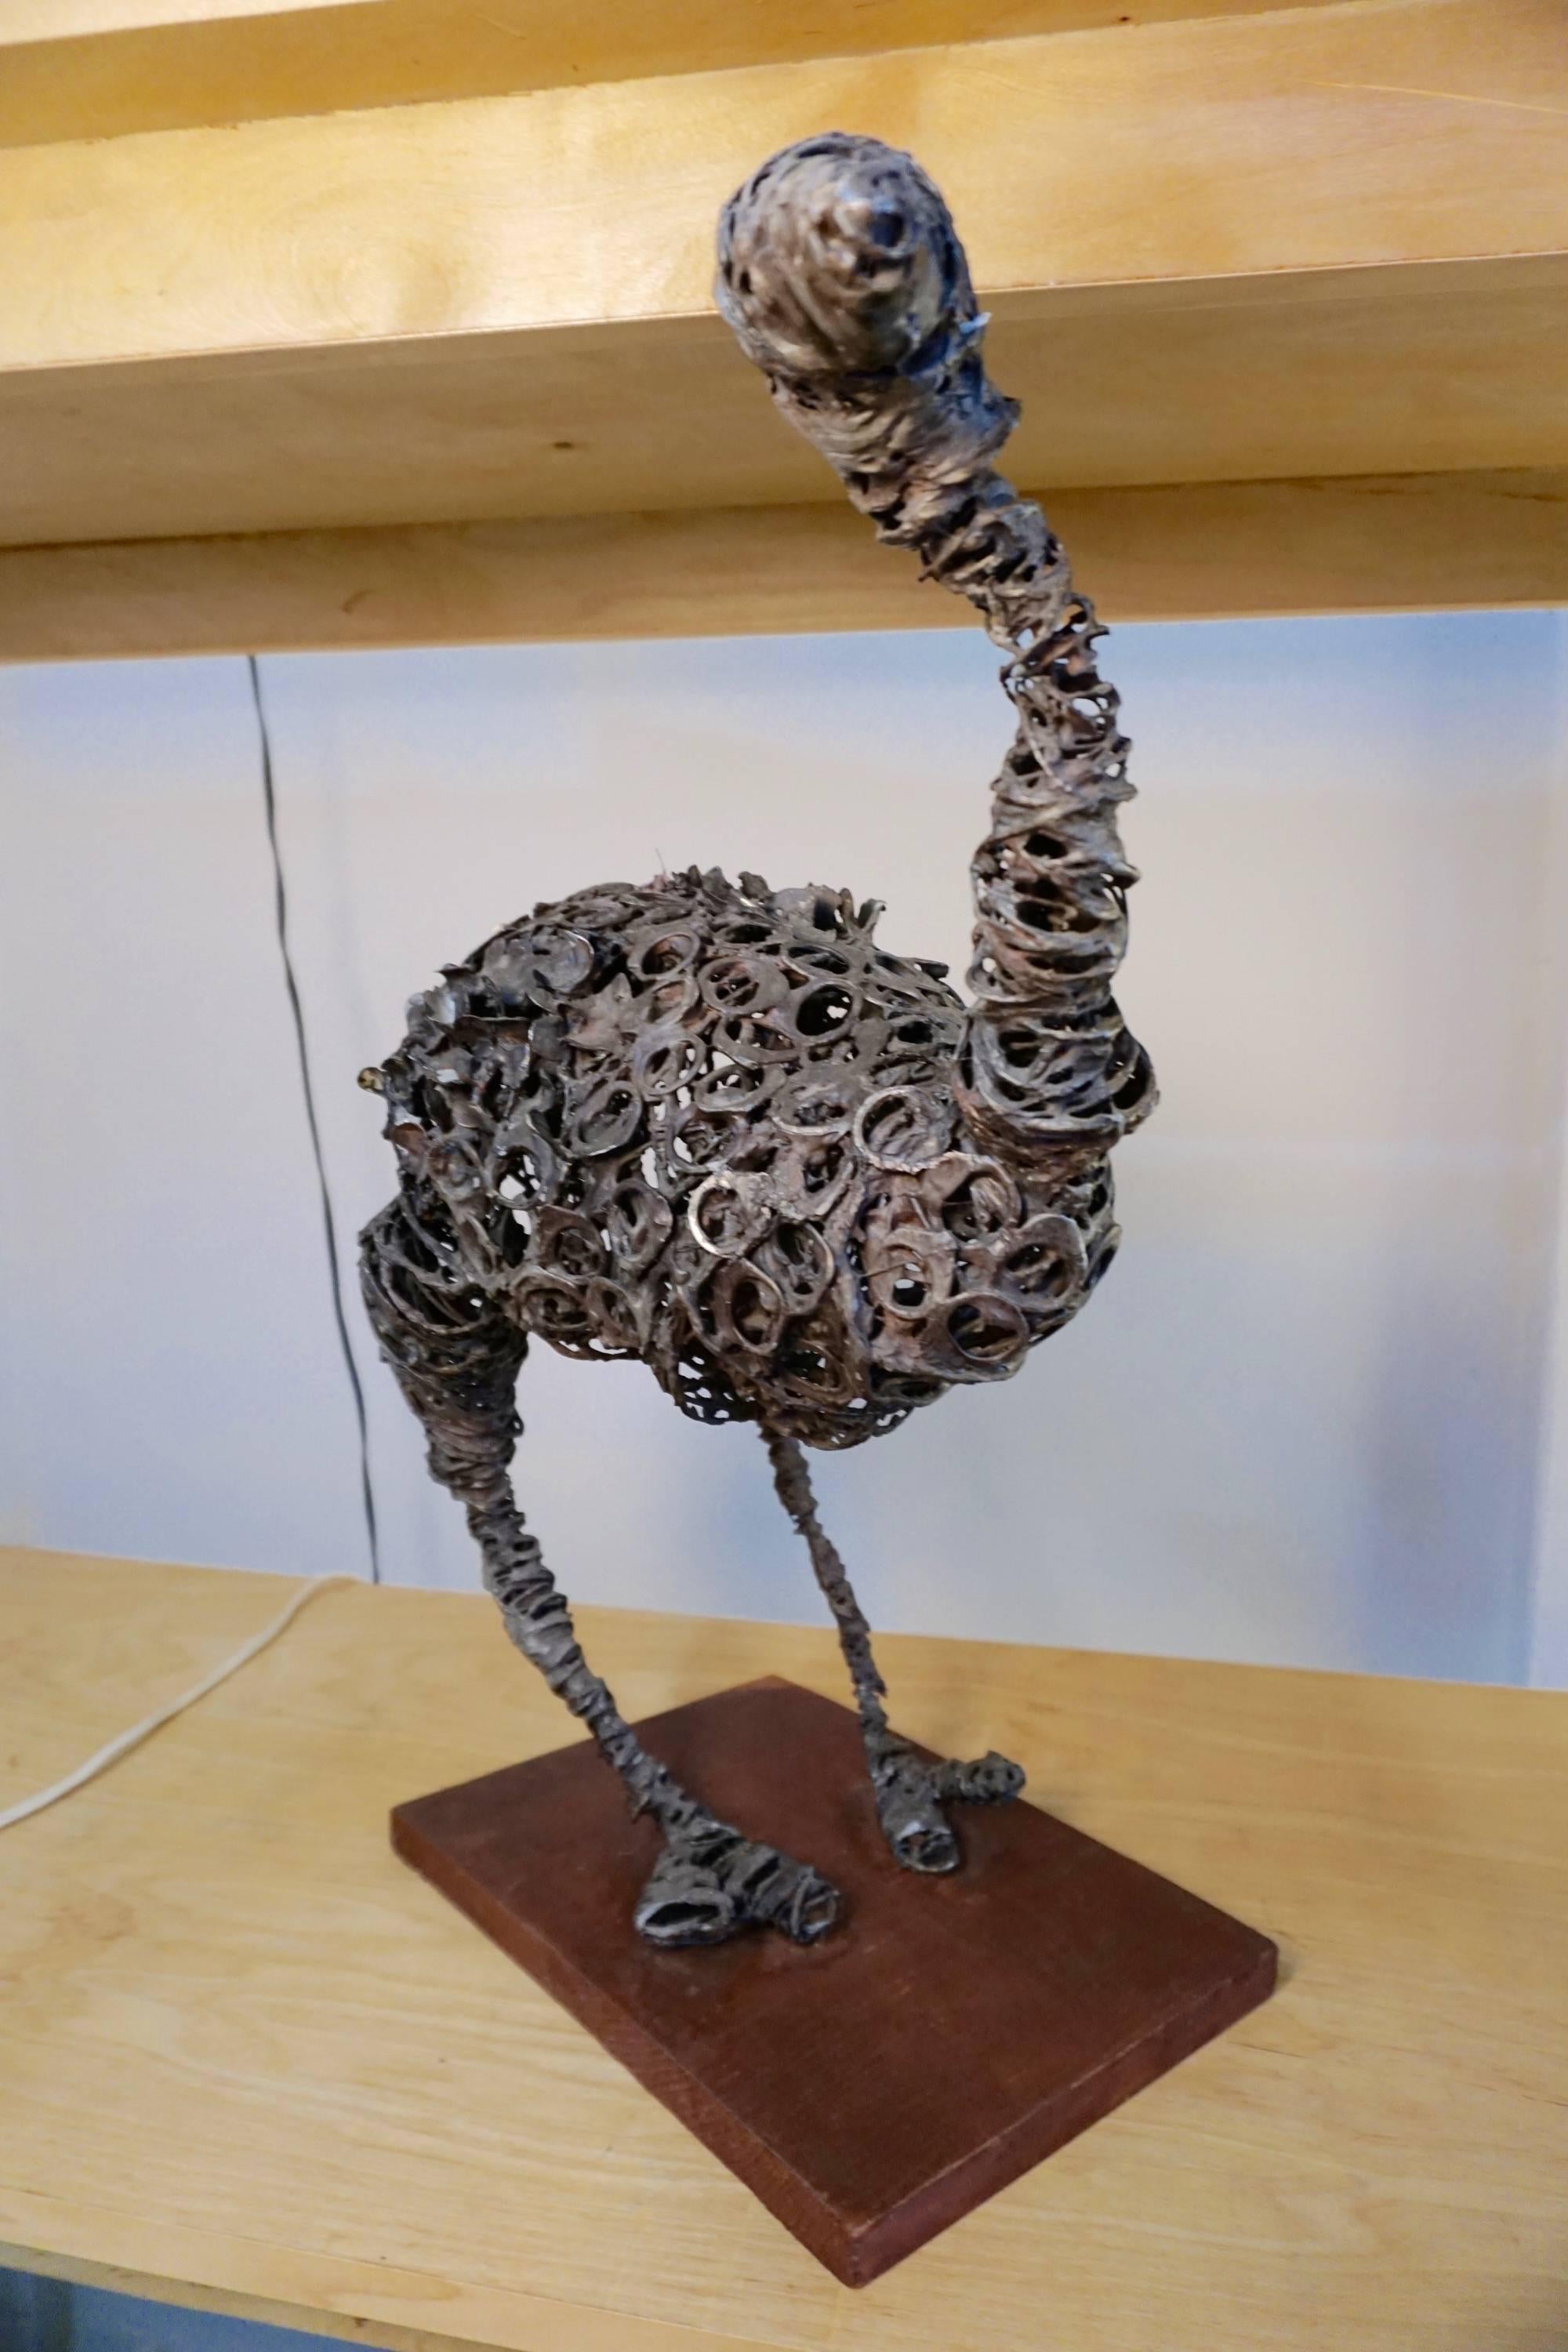 Interesting animal sculpture made out of pop tops from soda or beer cans.
Outsider or stoner art.